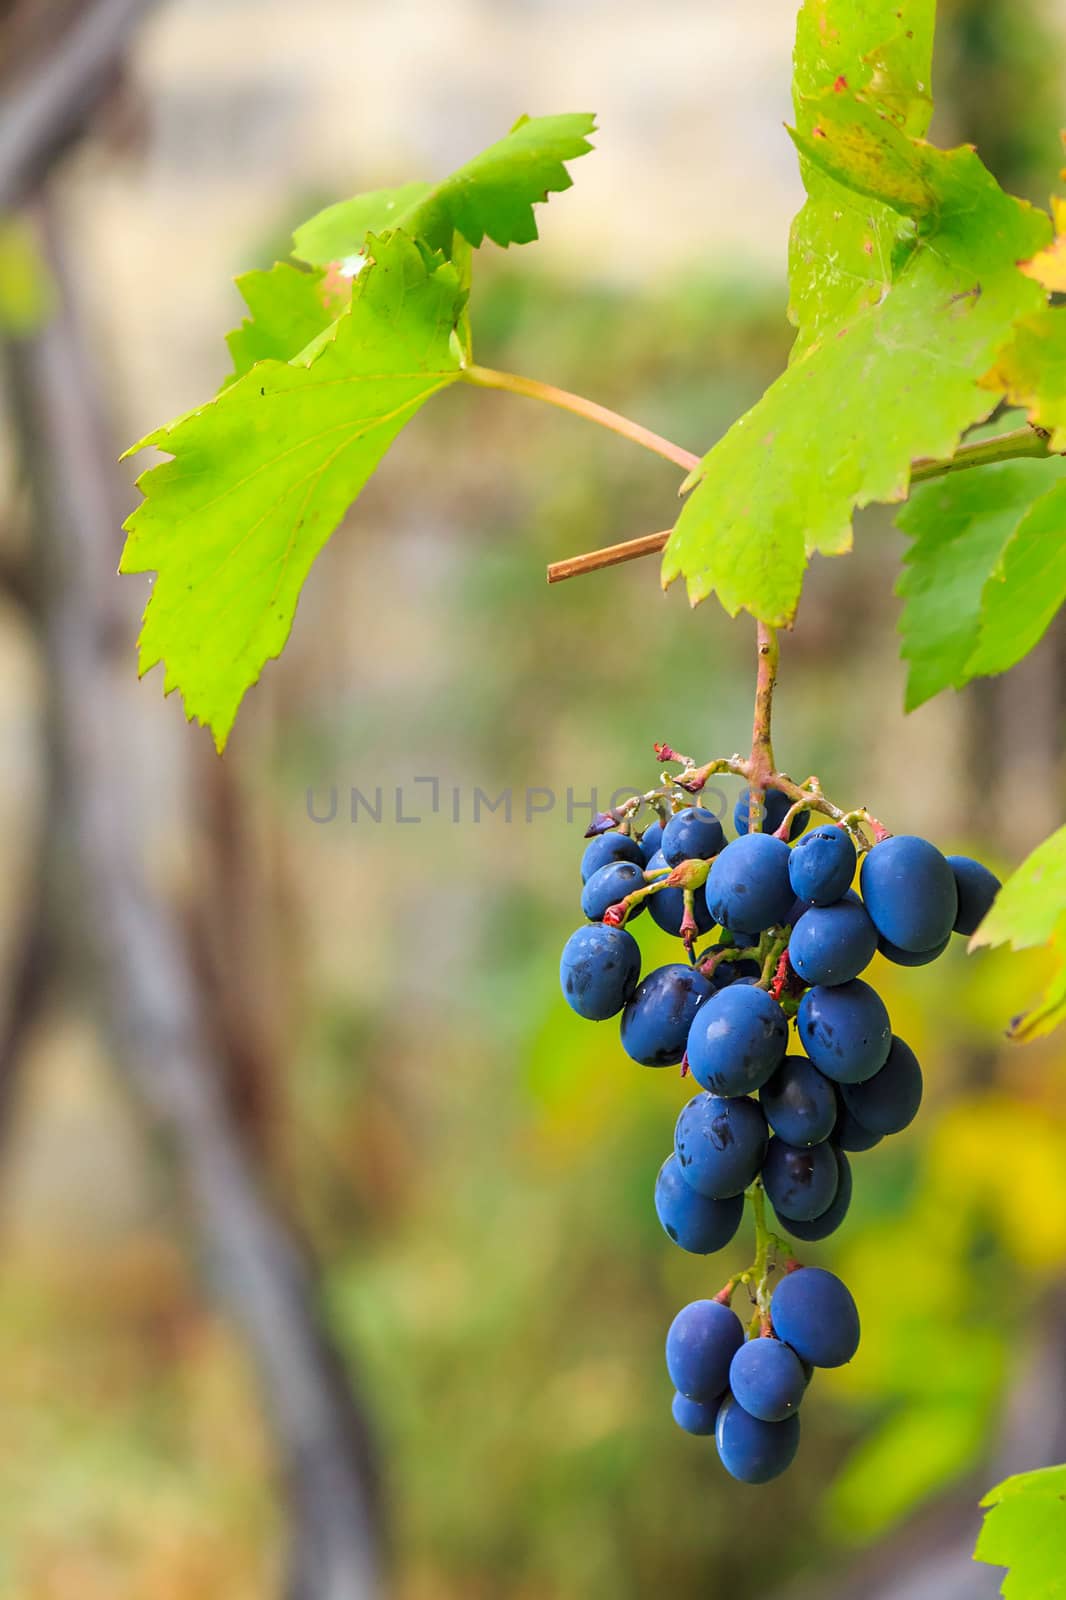 bunch of blue grapes with green leaves hanging on a vine in the vineyard abstract blurred background